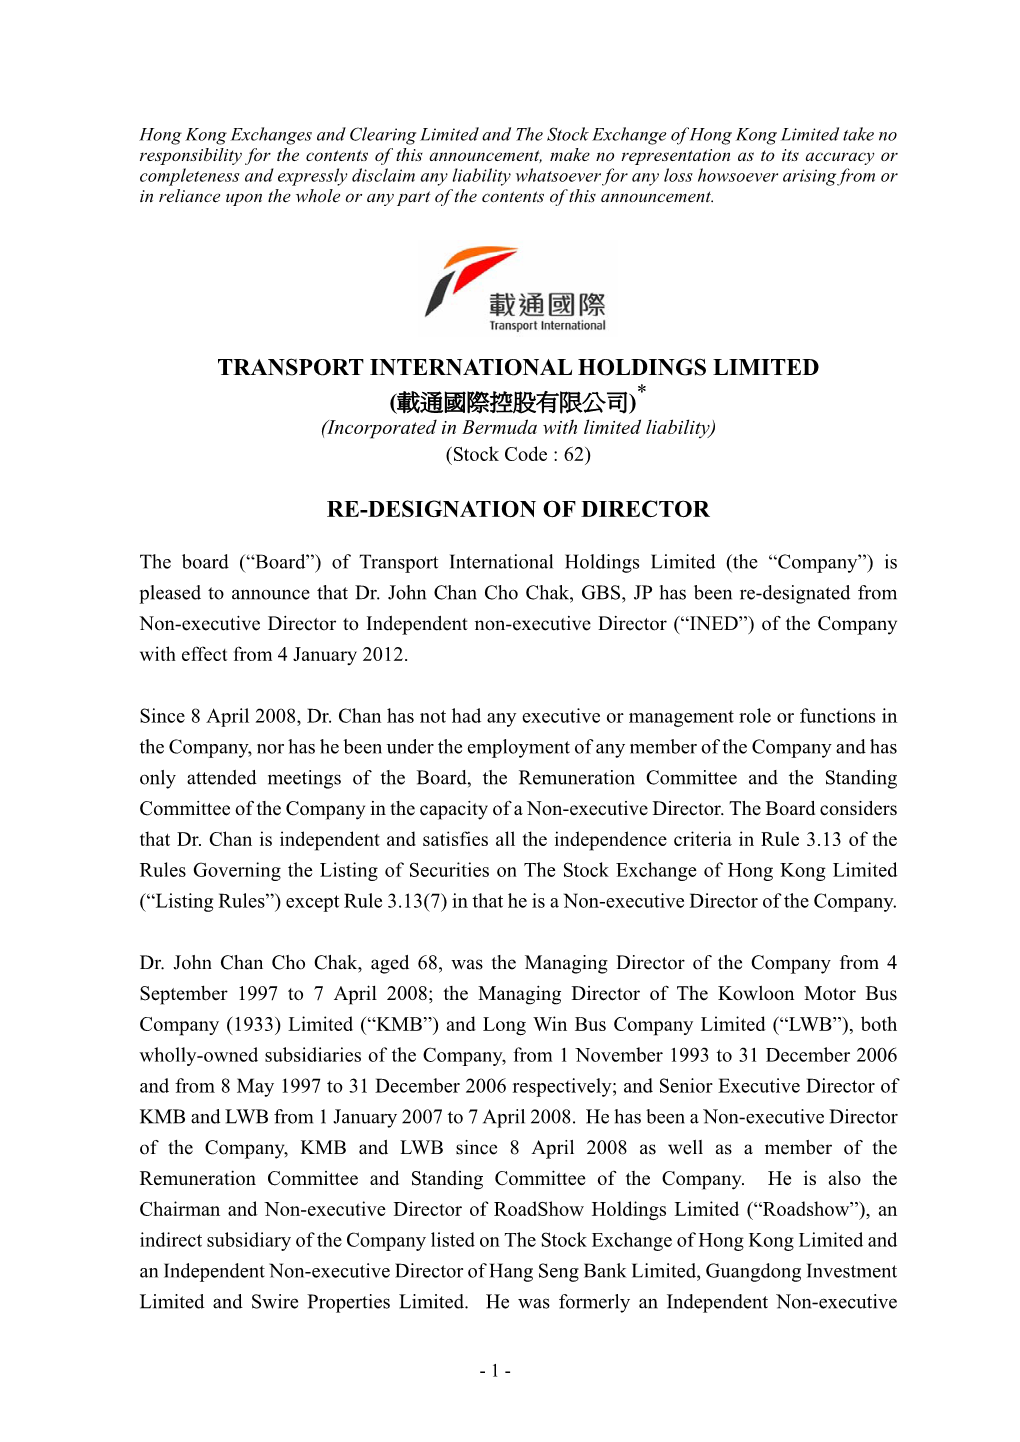 The Stock Exchange of Hong Kong Limited Takes No Responsibility For